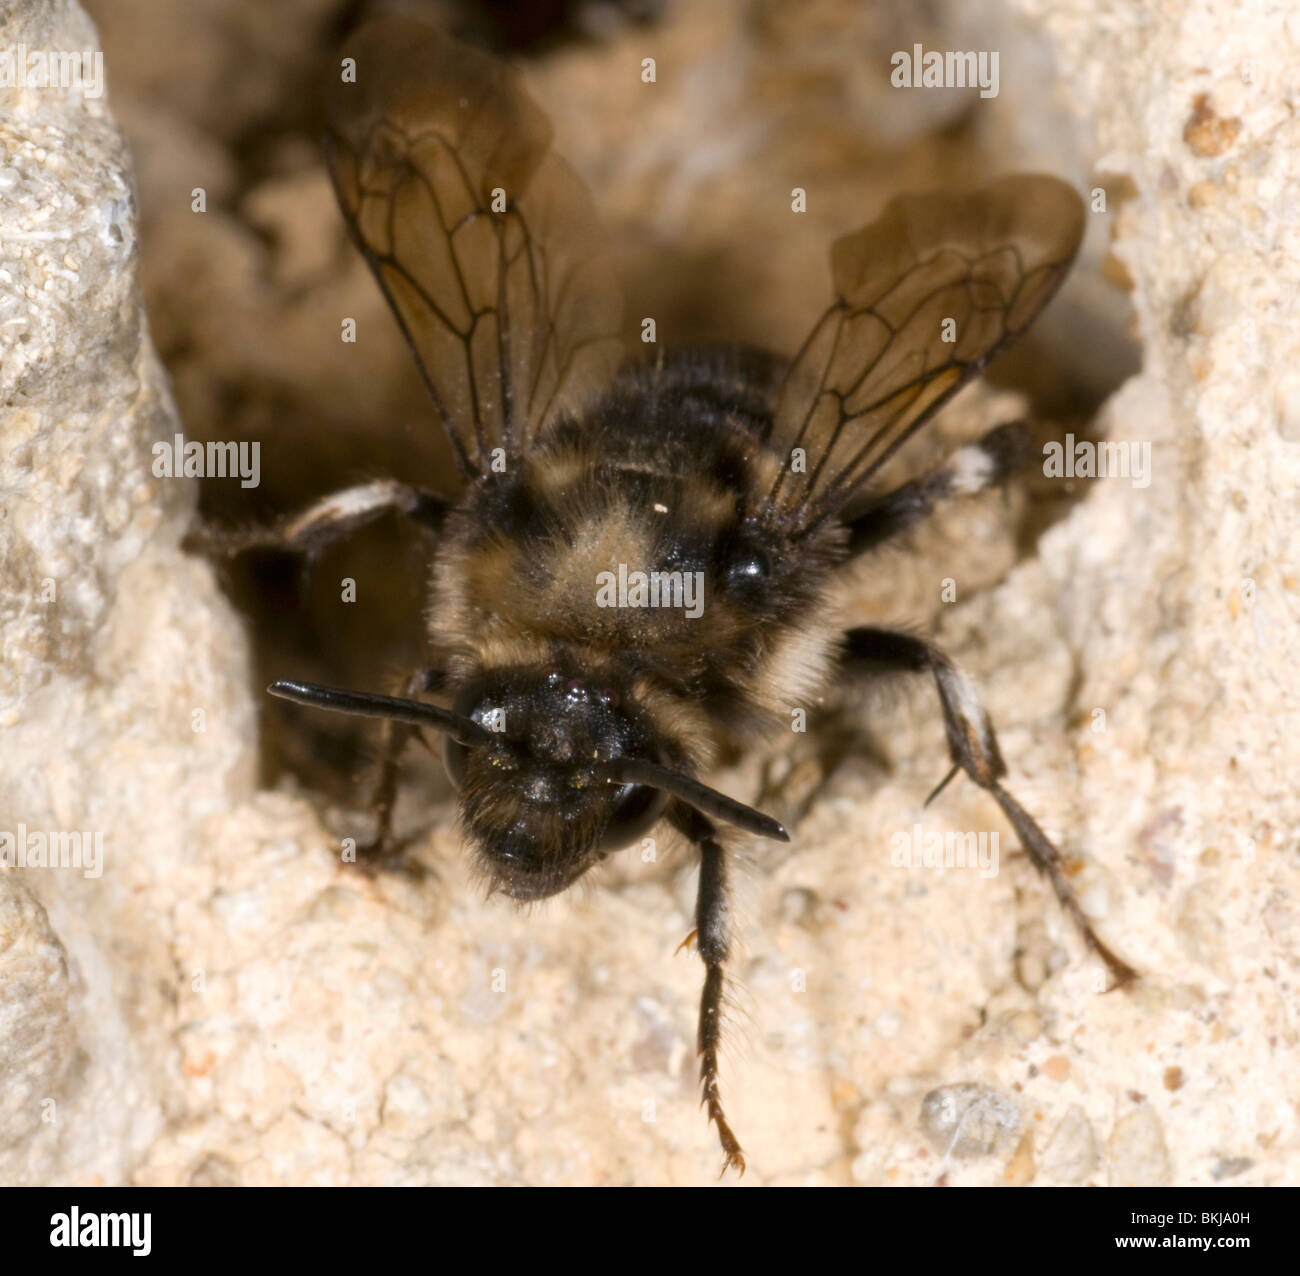 cuckoo bee emerging from the hole of the hairy footed flower bee, anthophora plumipes, after laying eggs. Stock Photo